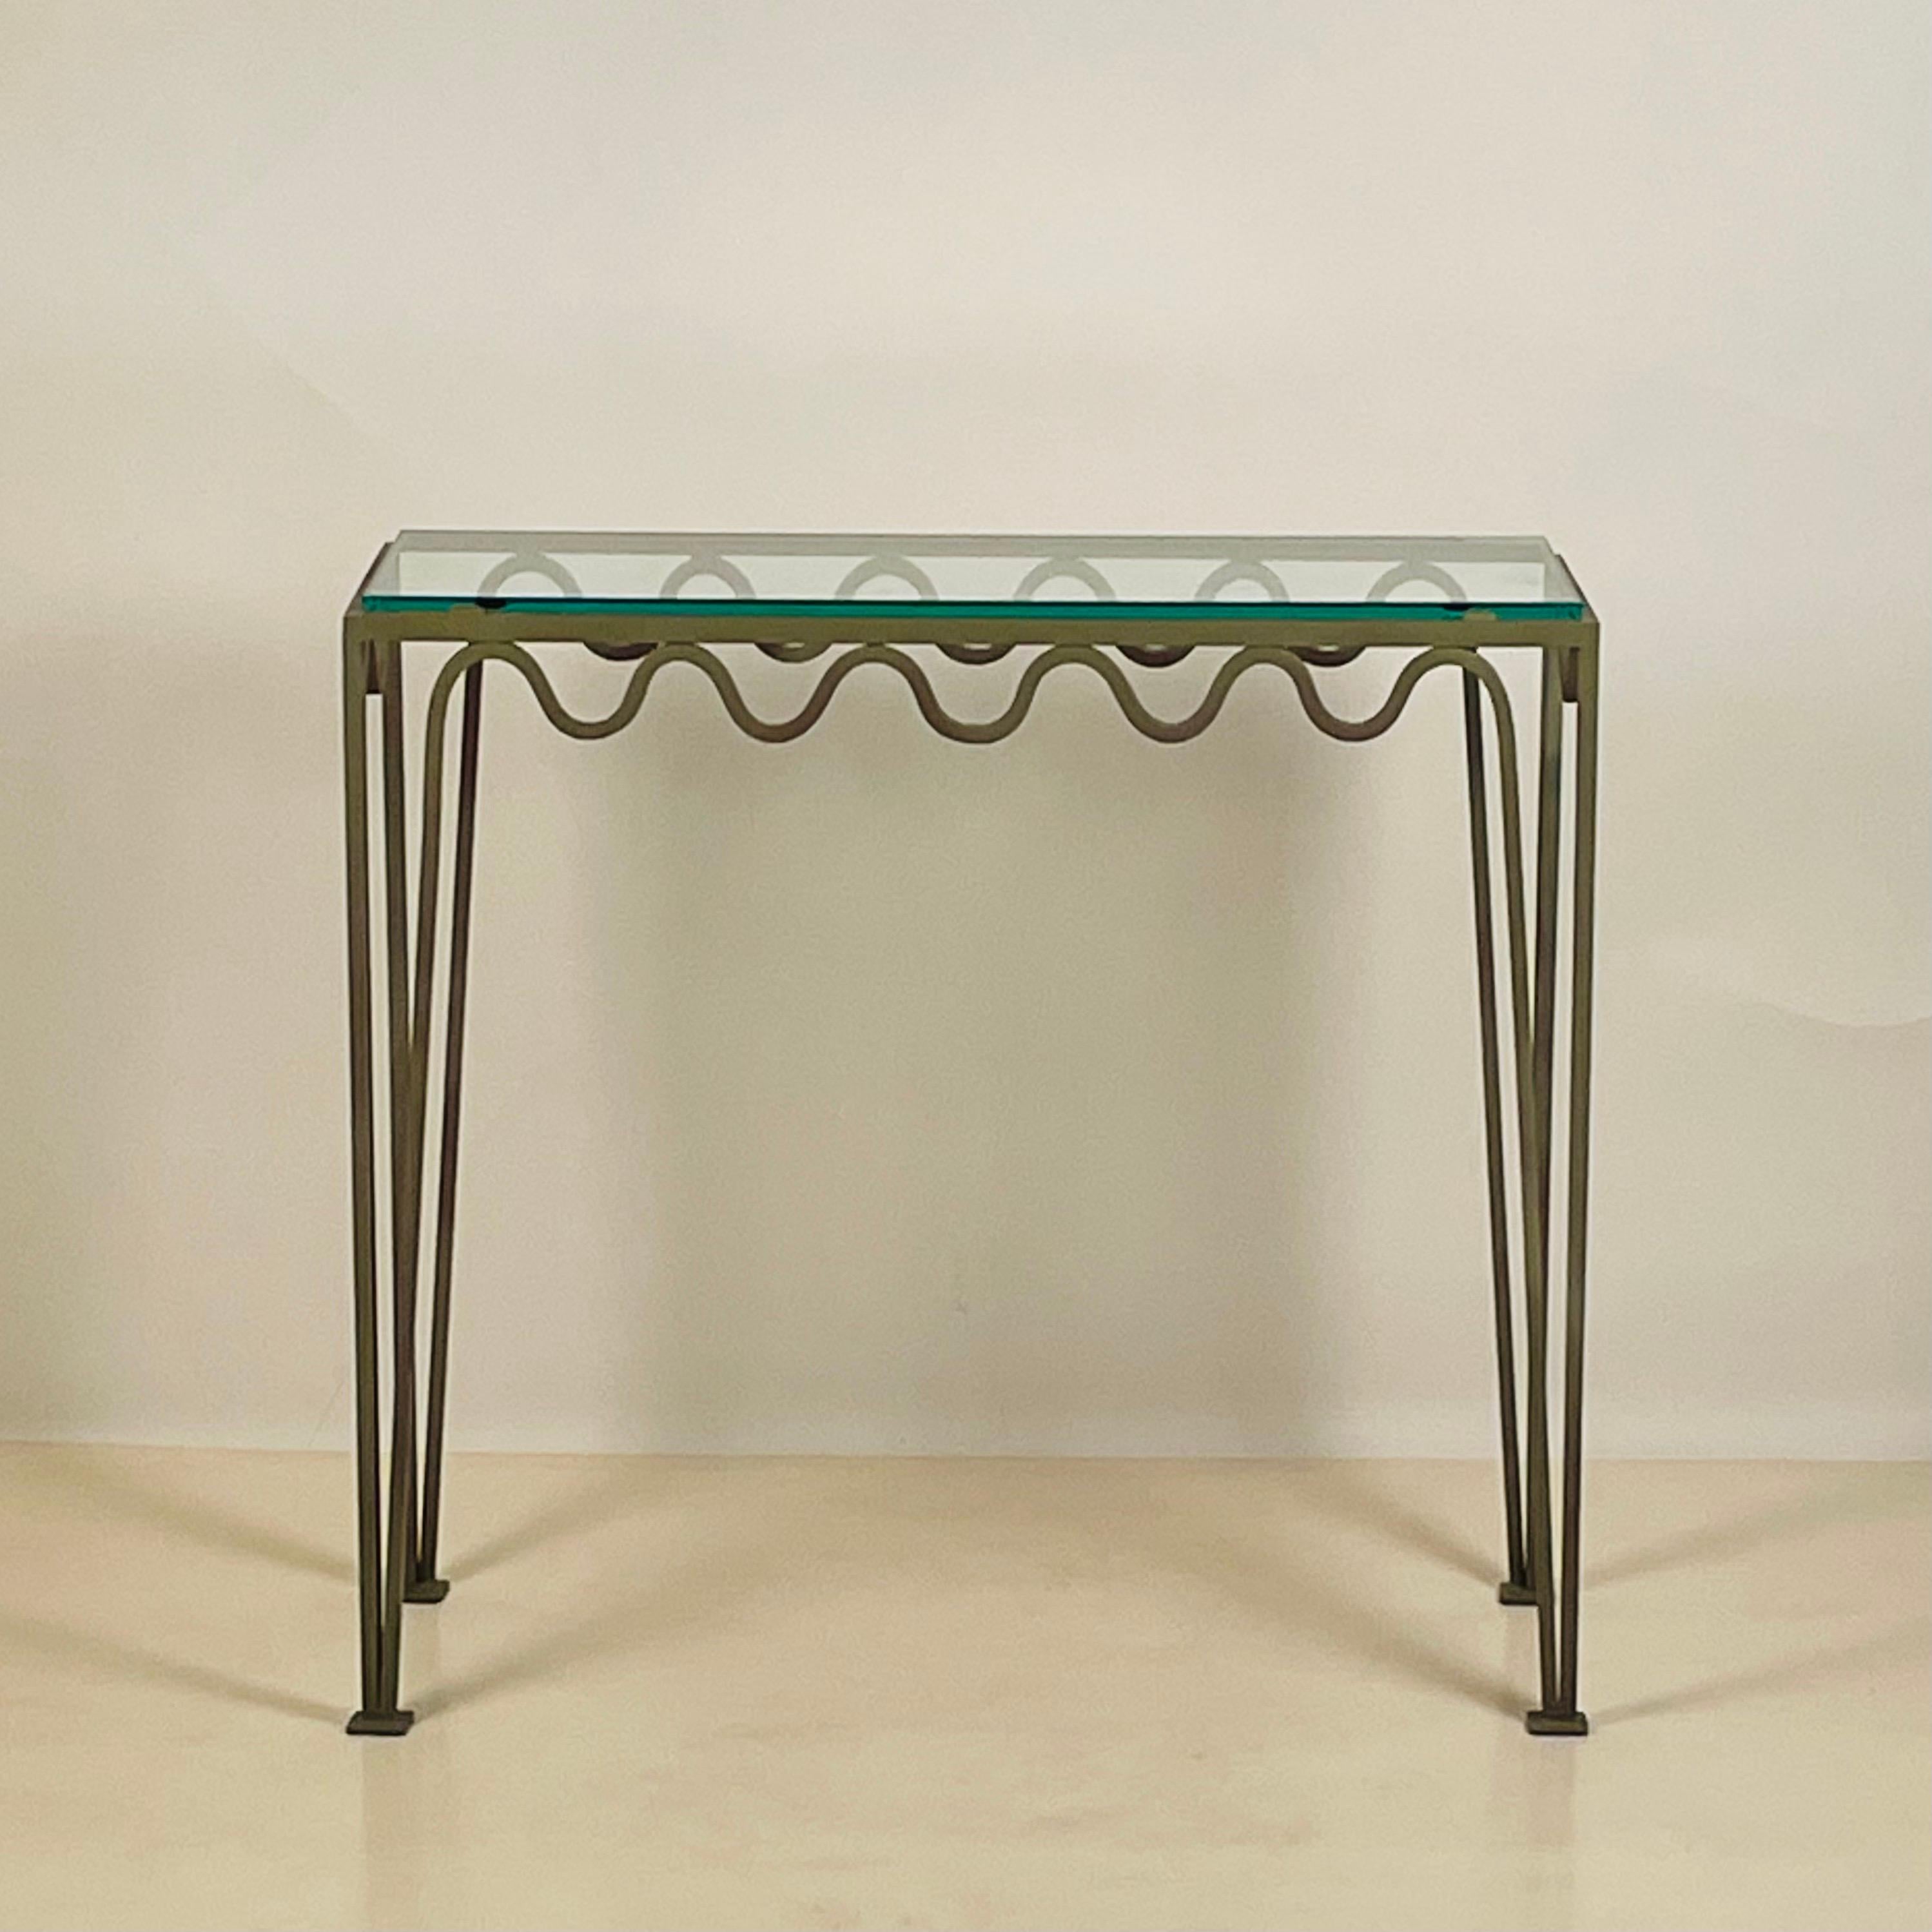 Modern Chic Verdigris 'Meandre' and Glass Console by Design Frères For Sale